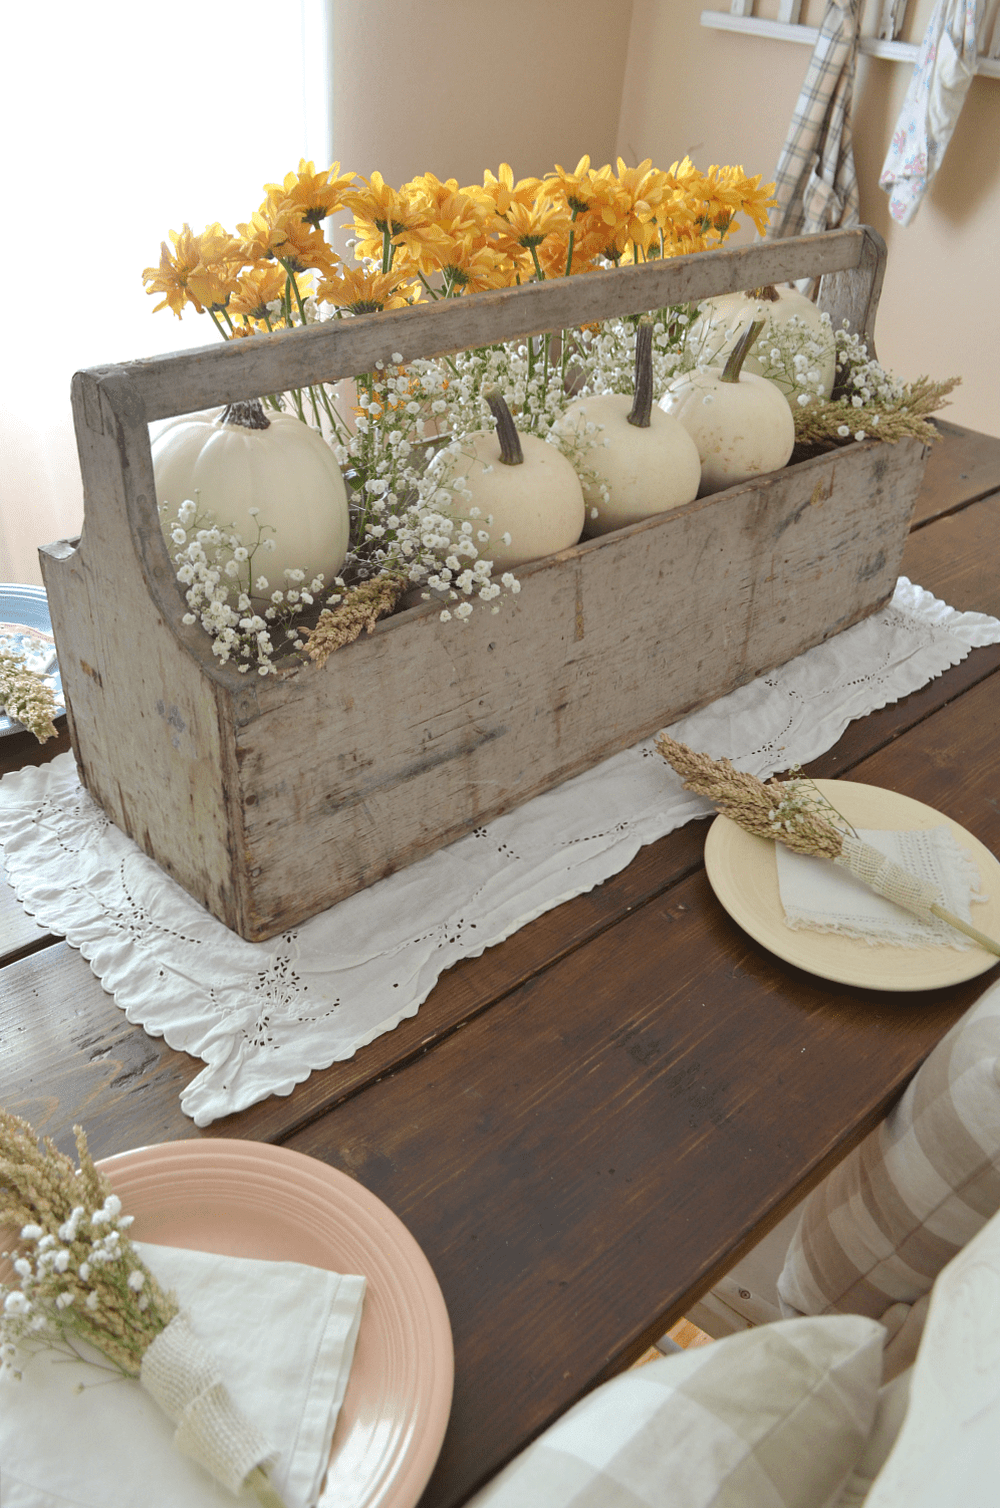 Wooden box with pumpkins and flowers thanksgiving centerpieces